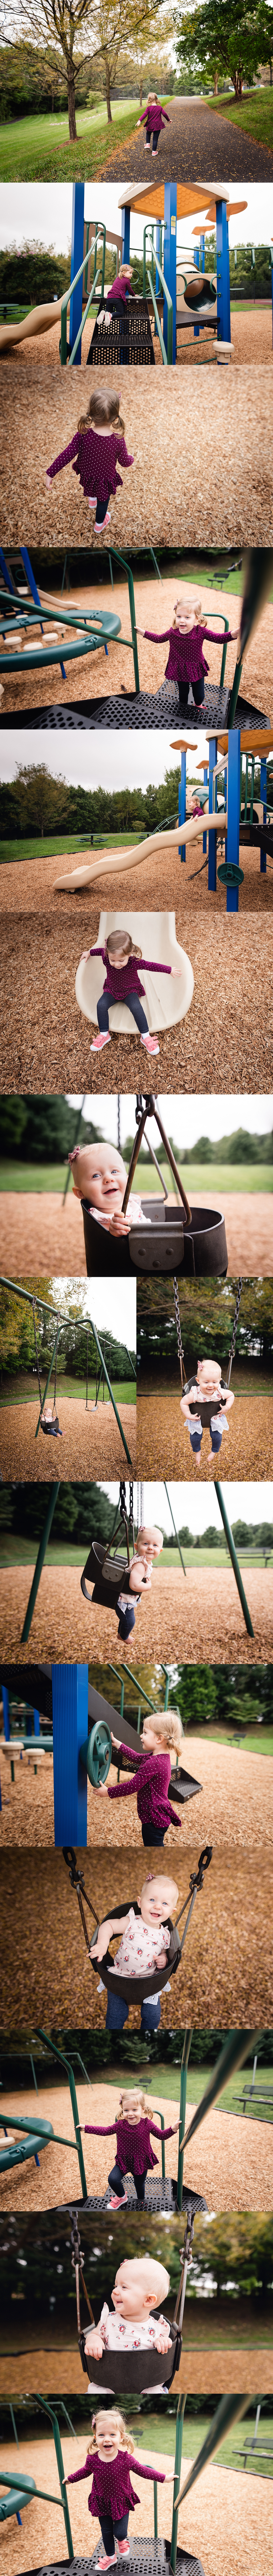 Fresh Autumn Air + First Swing Ride | Bethadilly Photography | www.bethadilly.com